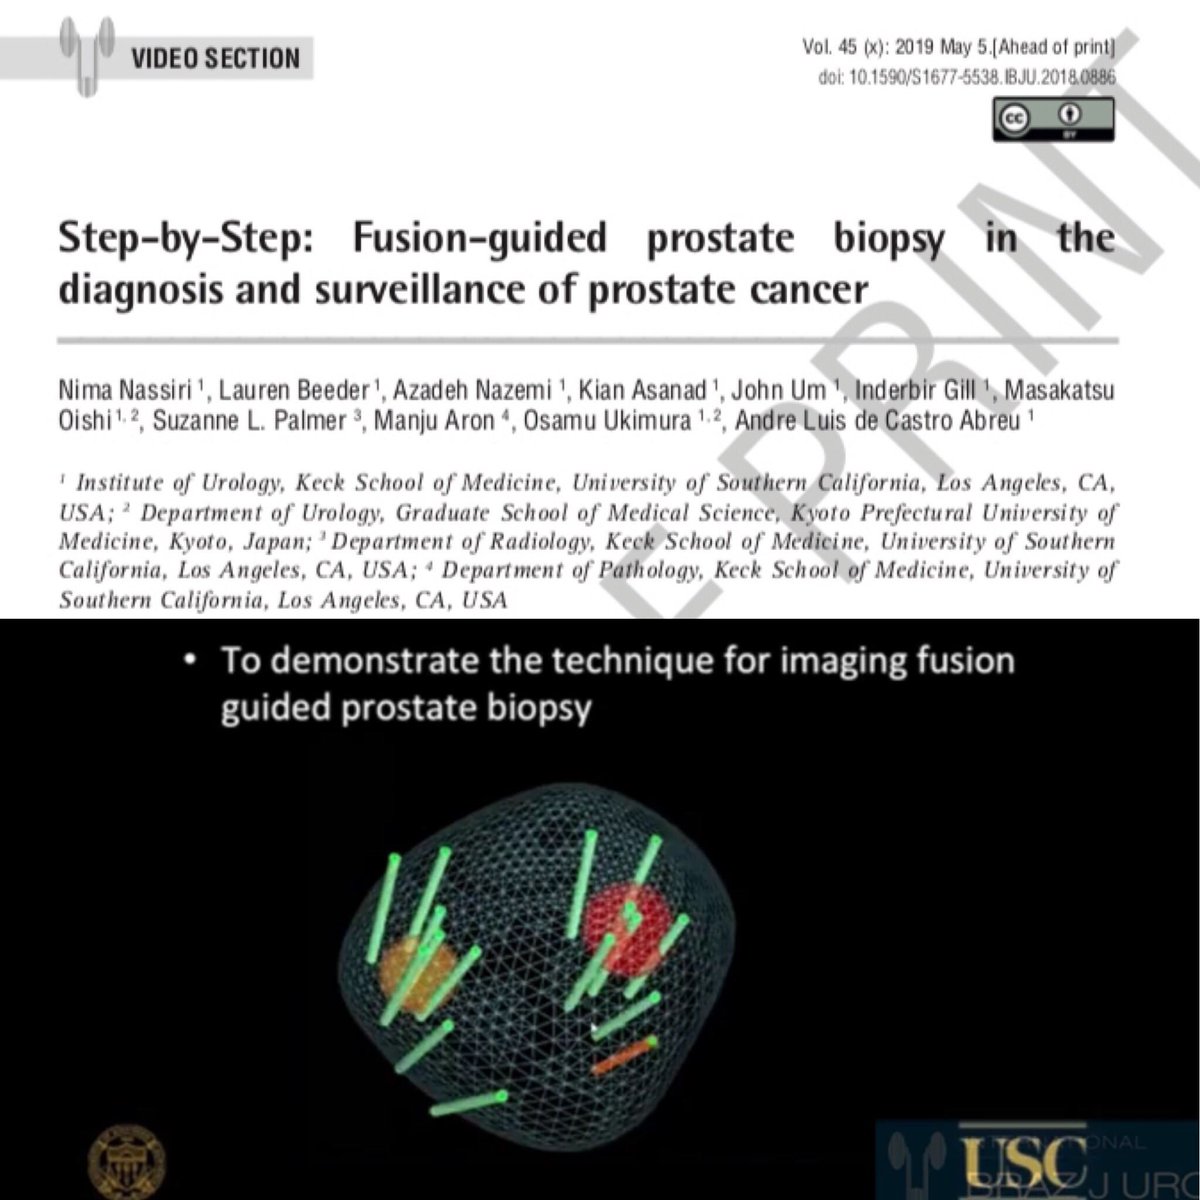 This is an educational video that provides our step-by-step technique for fusion-guided biopsy for prostate cancer diagnosis and surveillance.
@USC_Urology 
#MRIfirst
#prostatecancer
#prostatebiopsy
#MRITRUSfusionbiopsy
#MRI

intbrazjurol.com.br/video-section/…